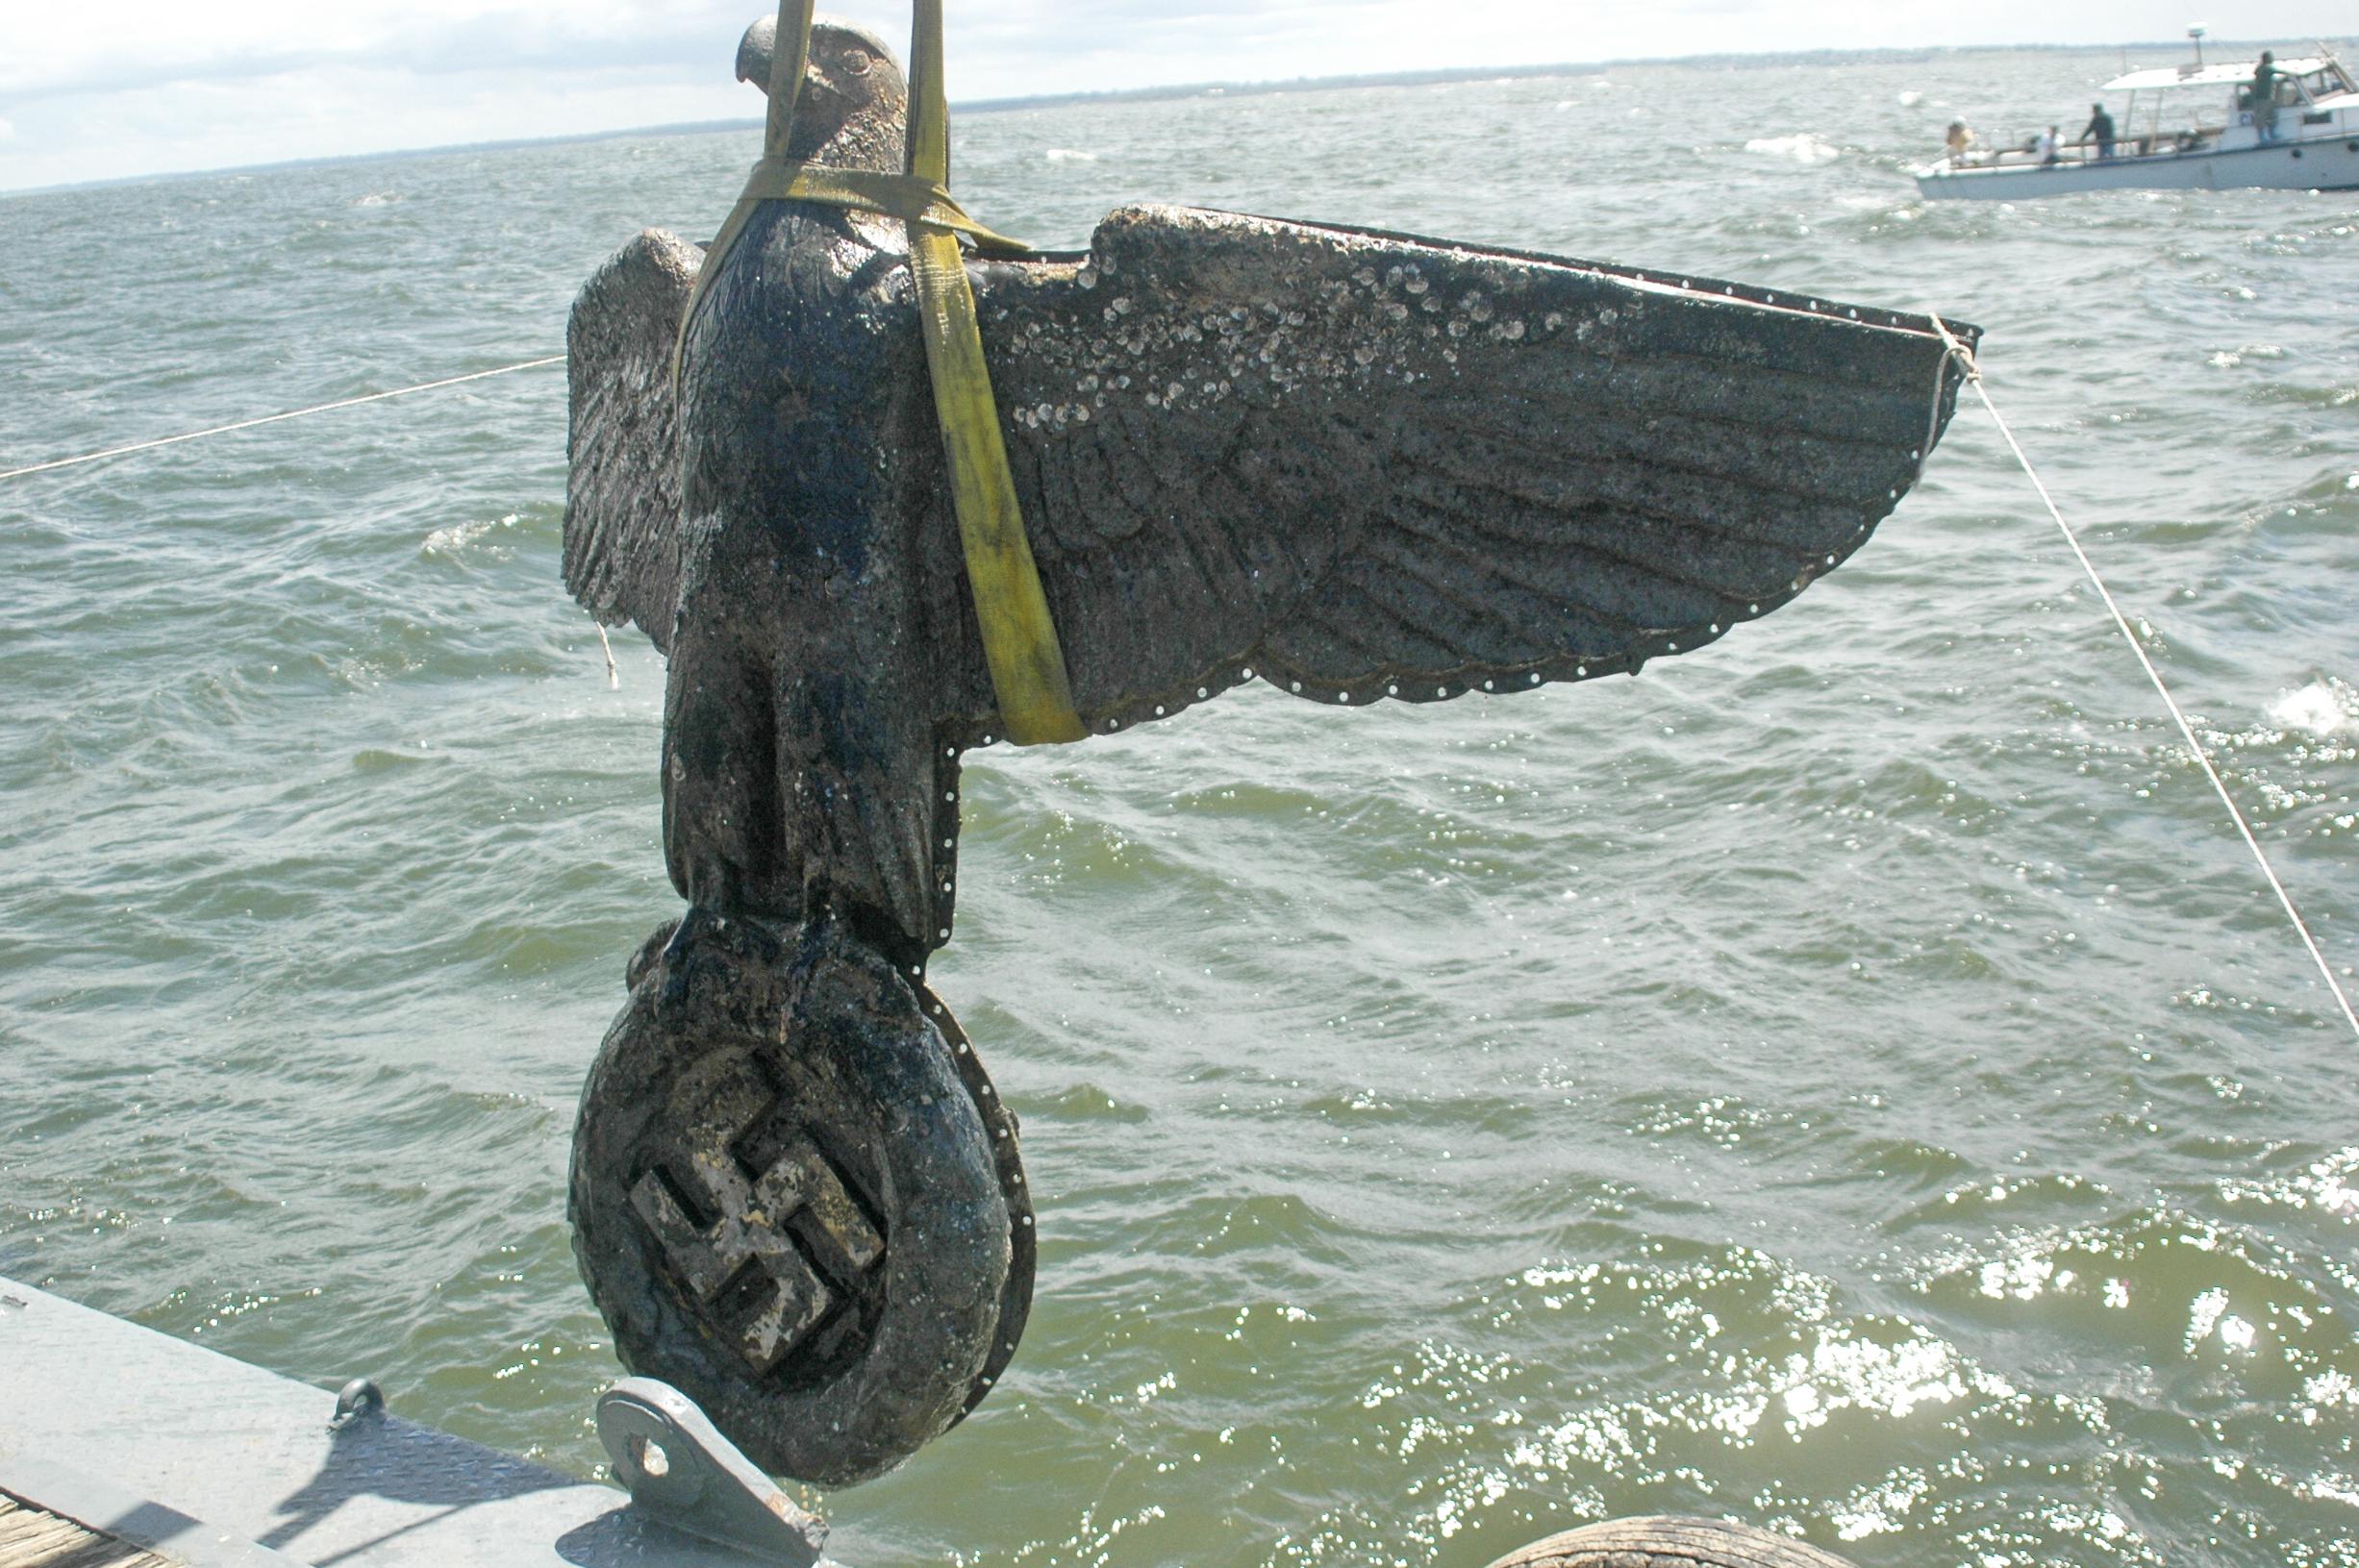 The Etchegarays intend to sell, mainly, the ship's rangefinder and its bow mask, an eagle - a traditional German symbol - holding a swastika, which has become a source of international controversy.